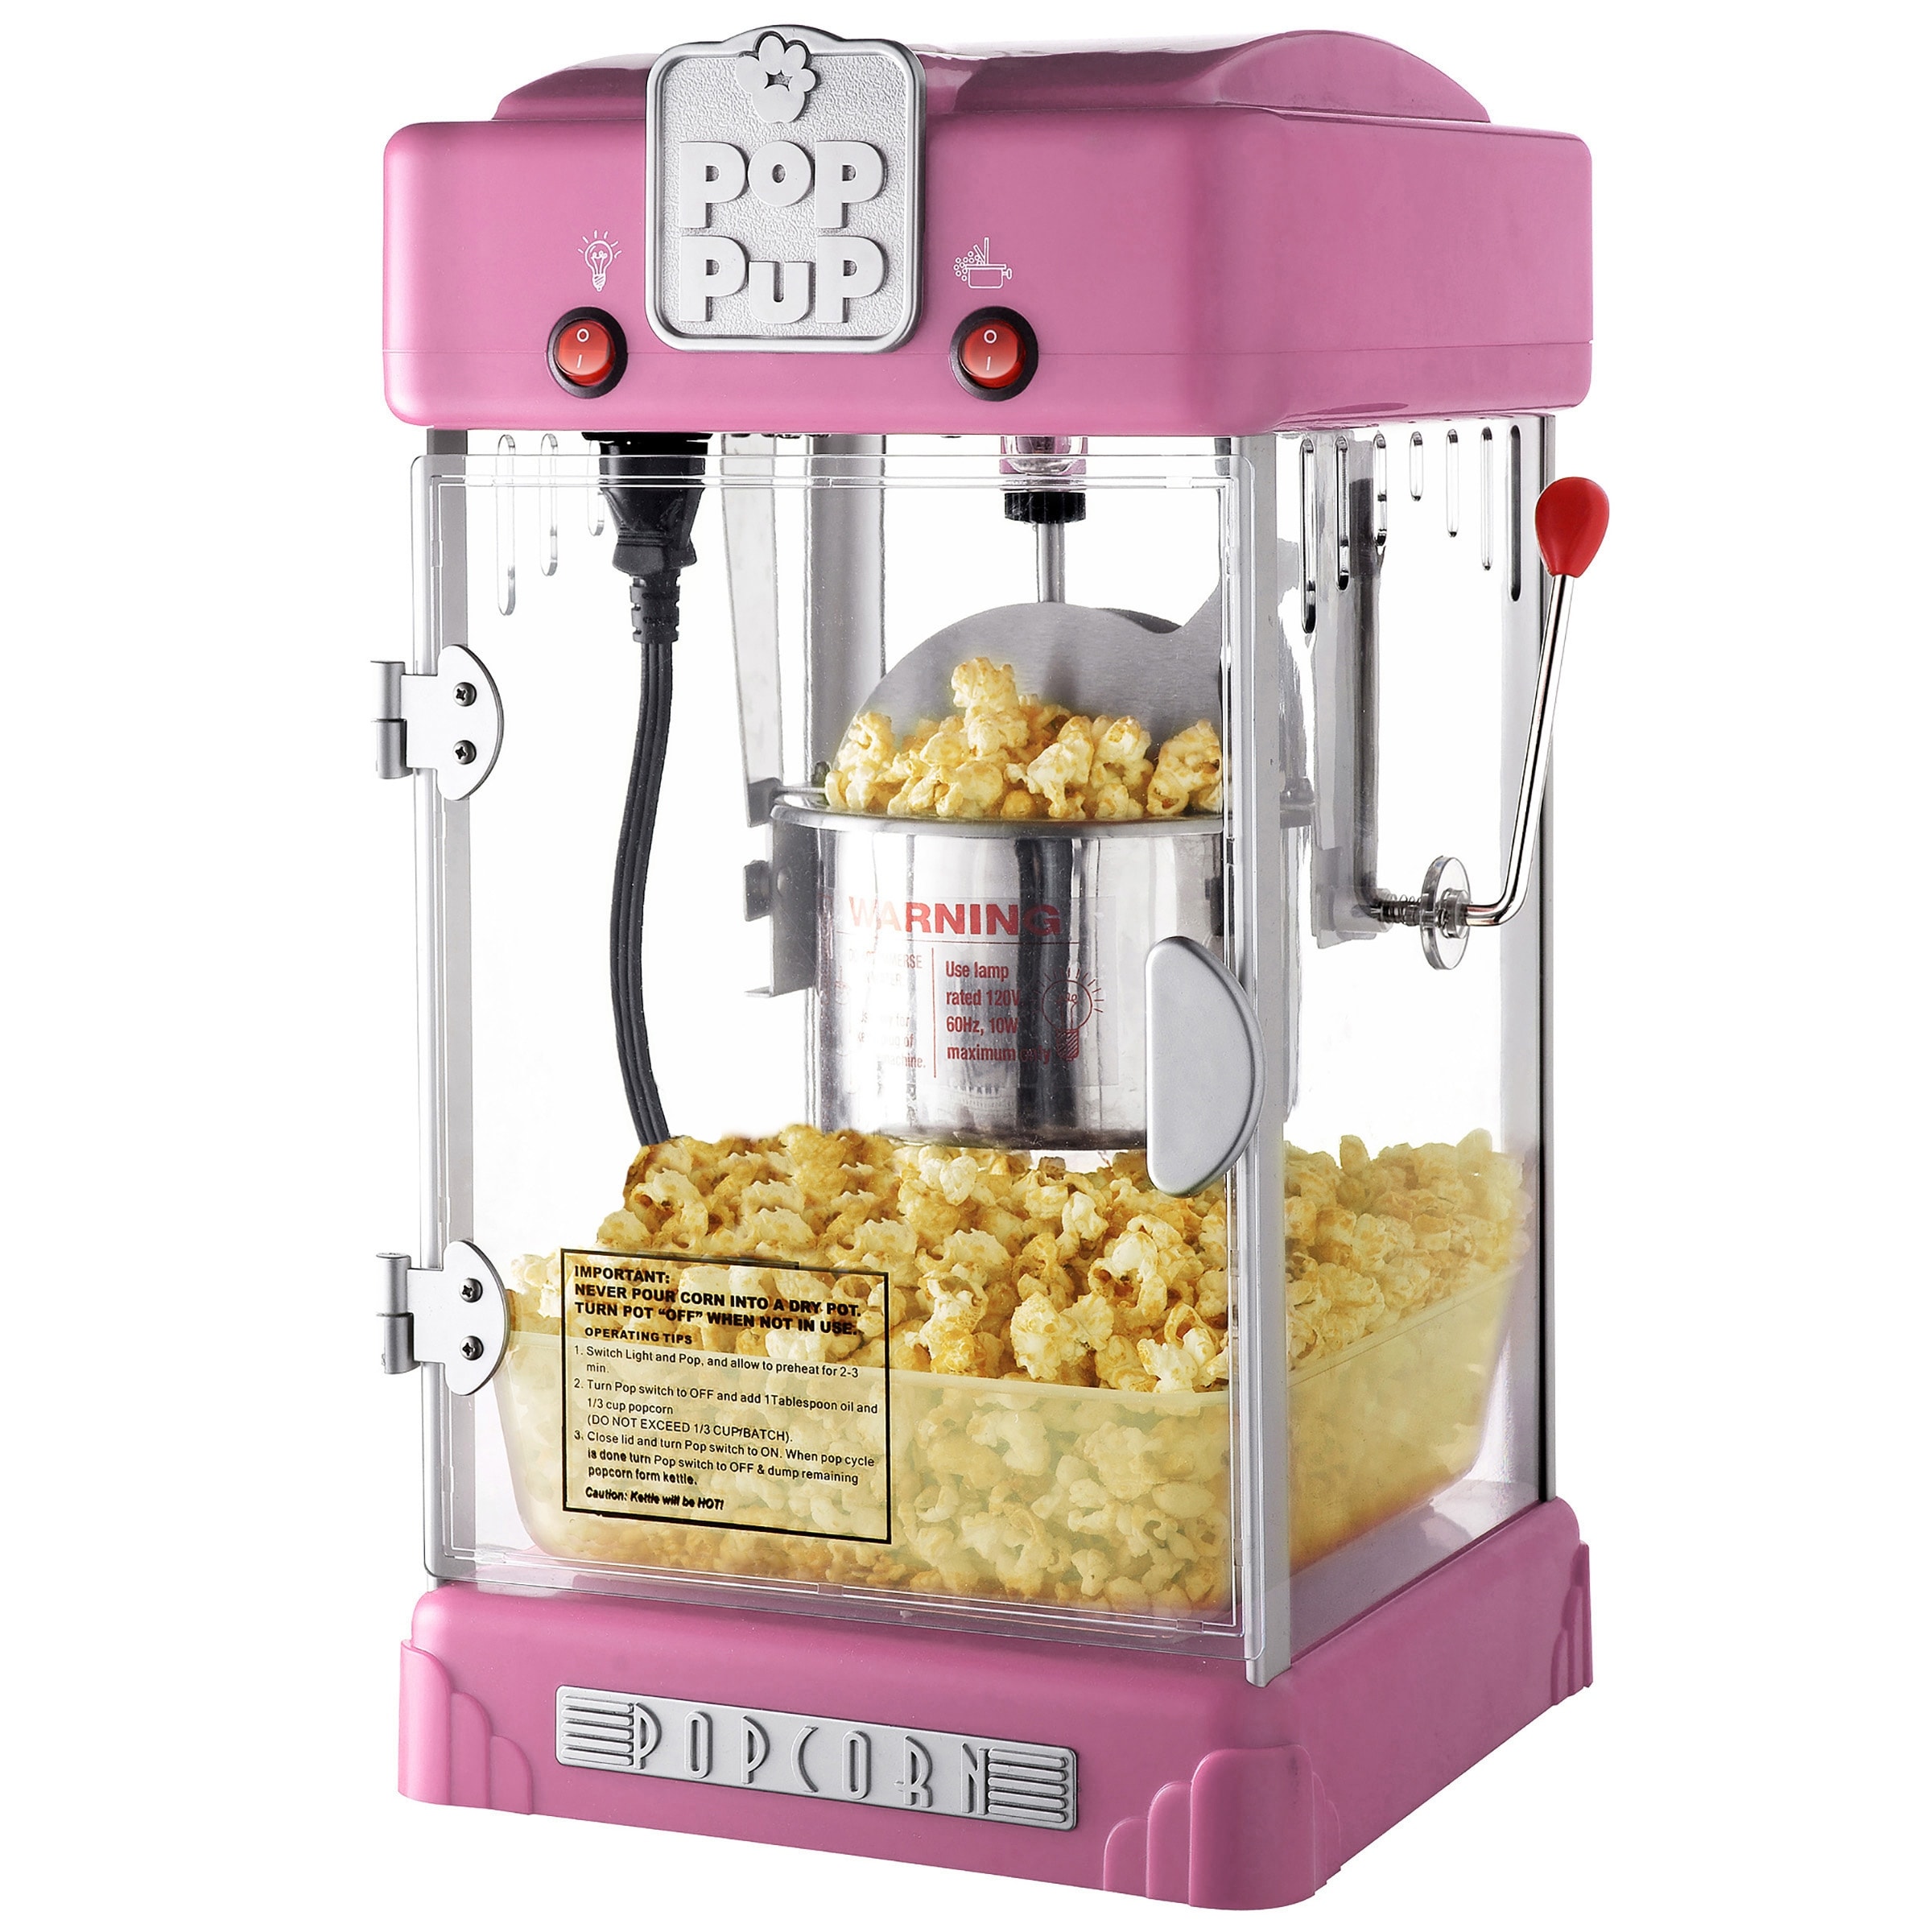 https://ak1.ostkcdn.com/images/products/is/images/direct/a7e8431edd60495238bb19ecc02827c2566f607e/Pop-Pup-Countertop-Popcorn-Machine-2.5oz-Kettle-by-Great-Northern-Popcorn-%28Pink%29.jpg